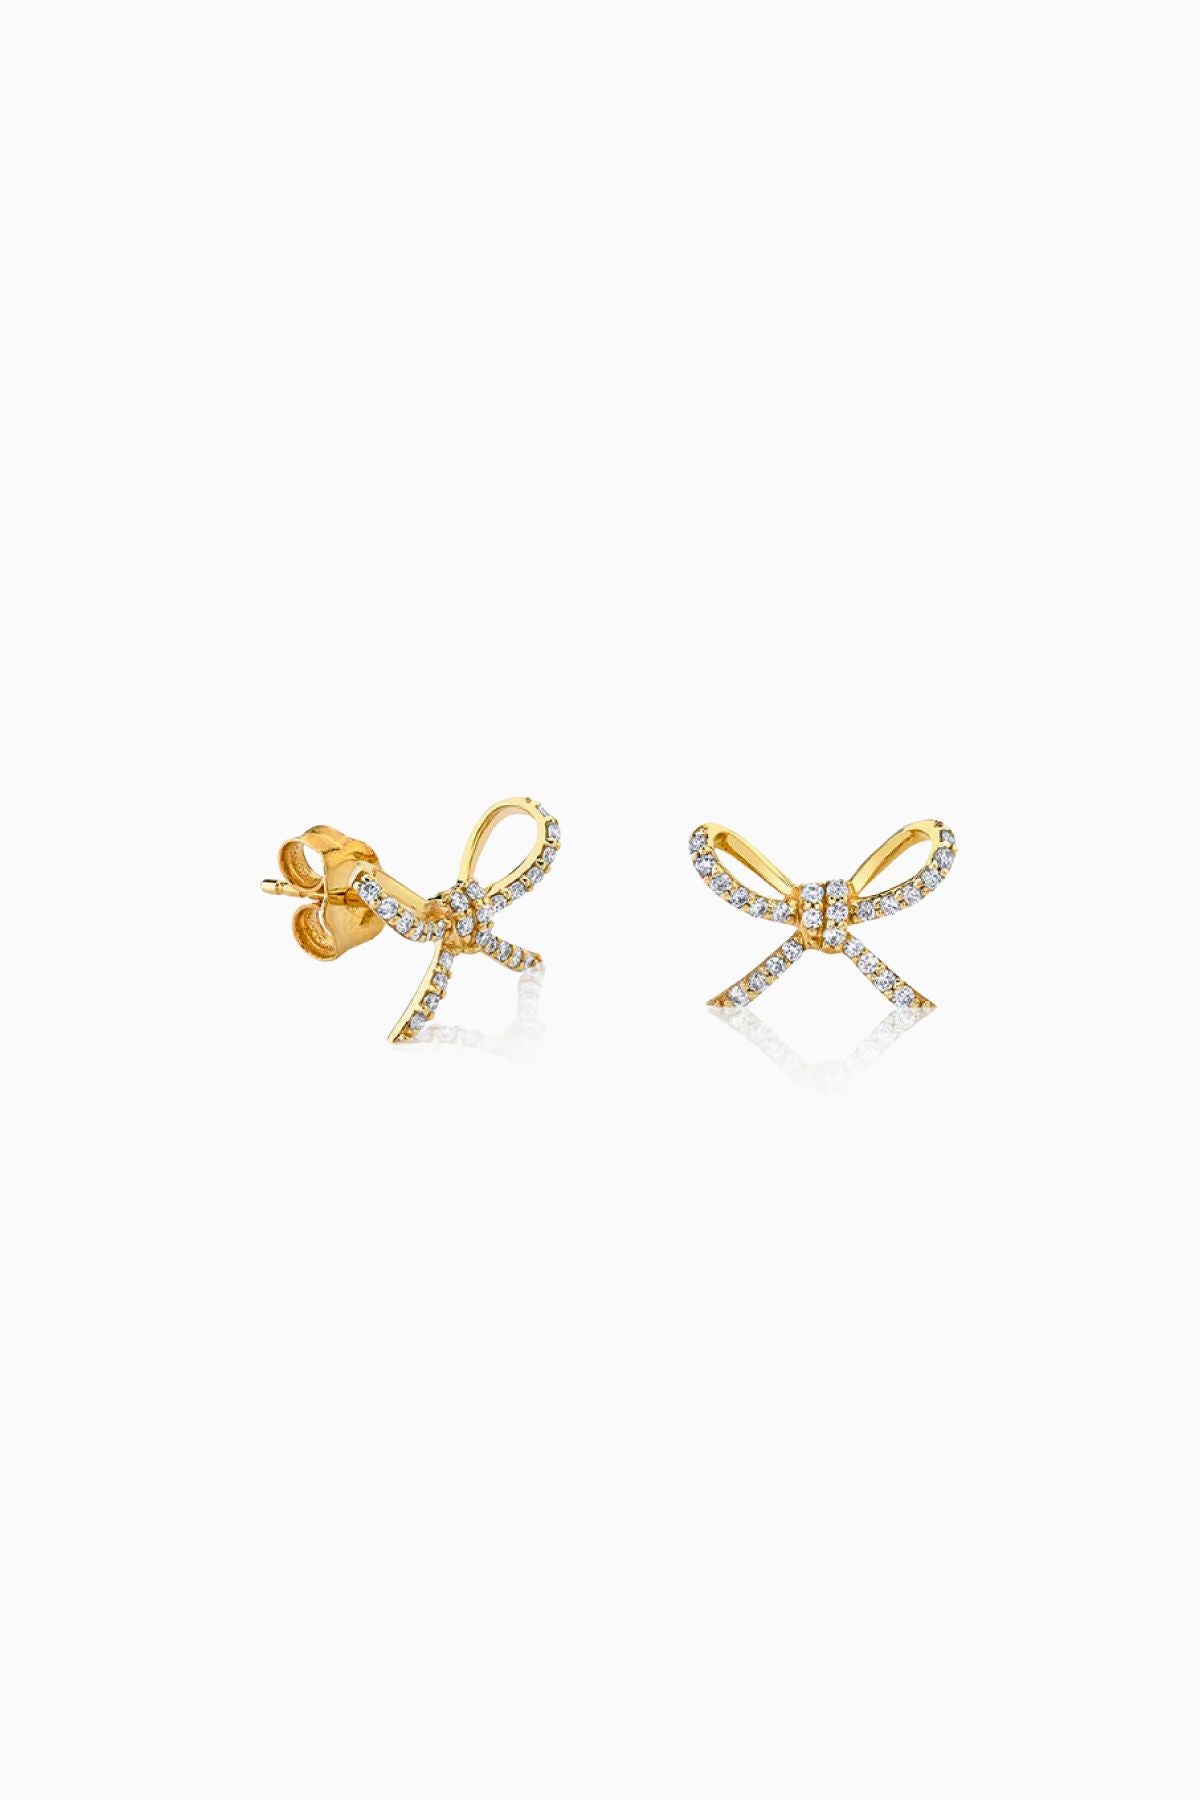 Sydney Evan Pave Bow Stud Earrings - Yellow Gold